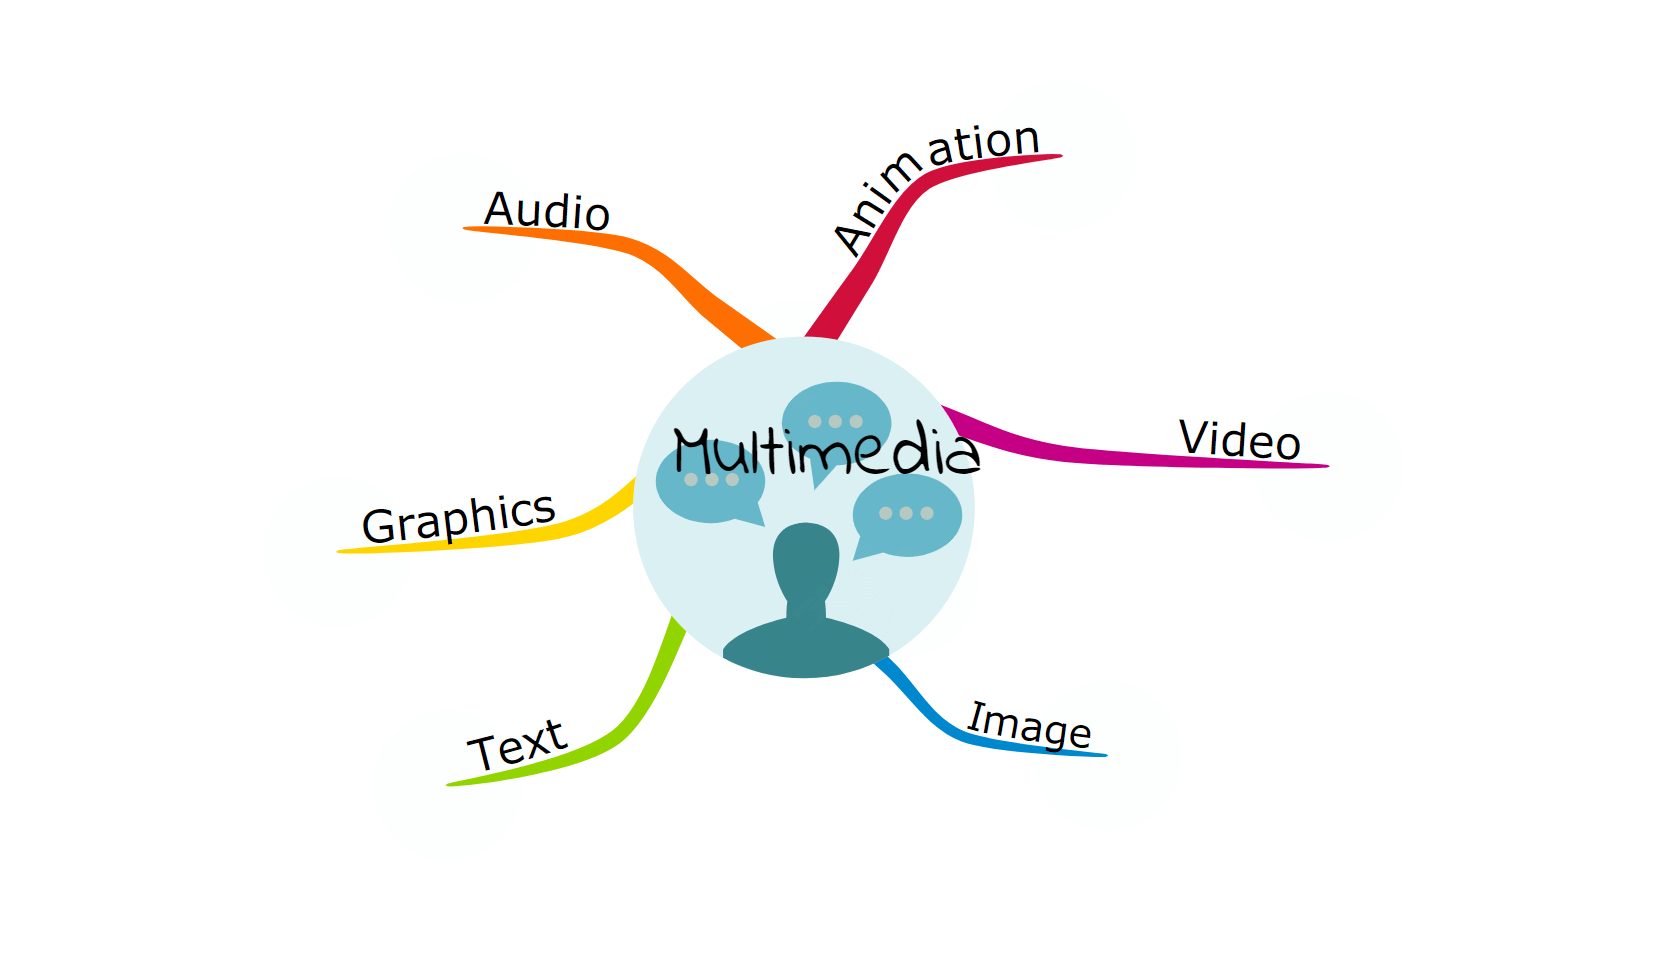 Mind map example from Mapul